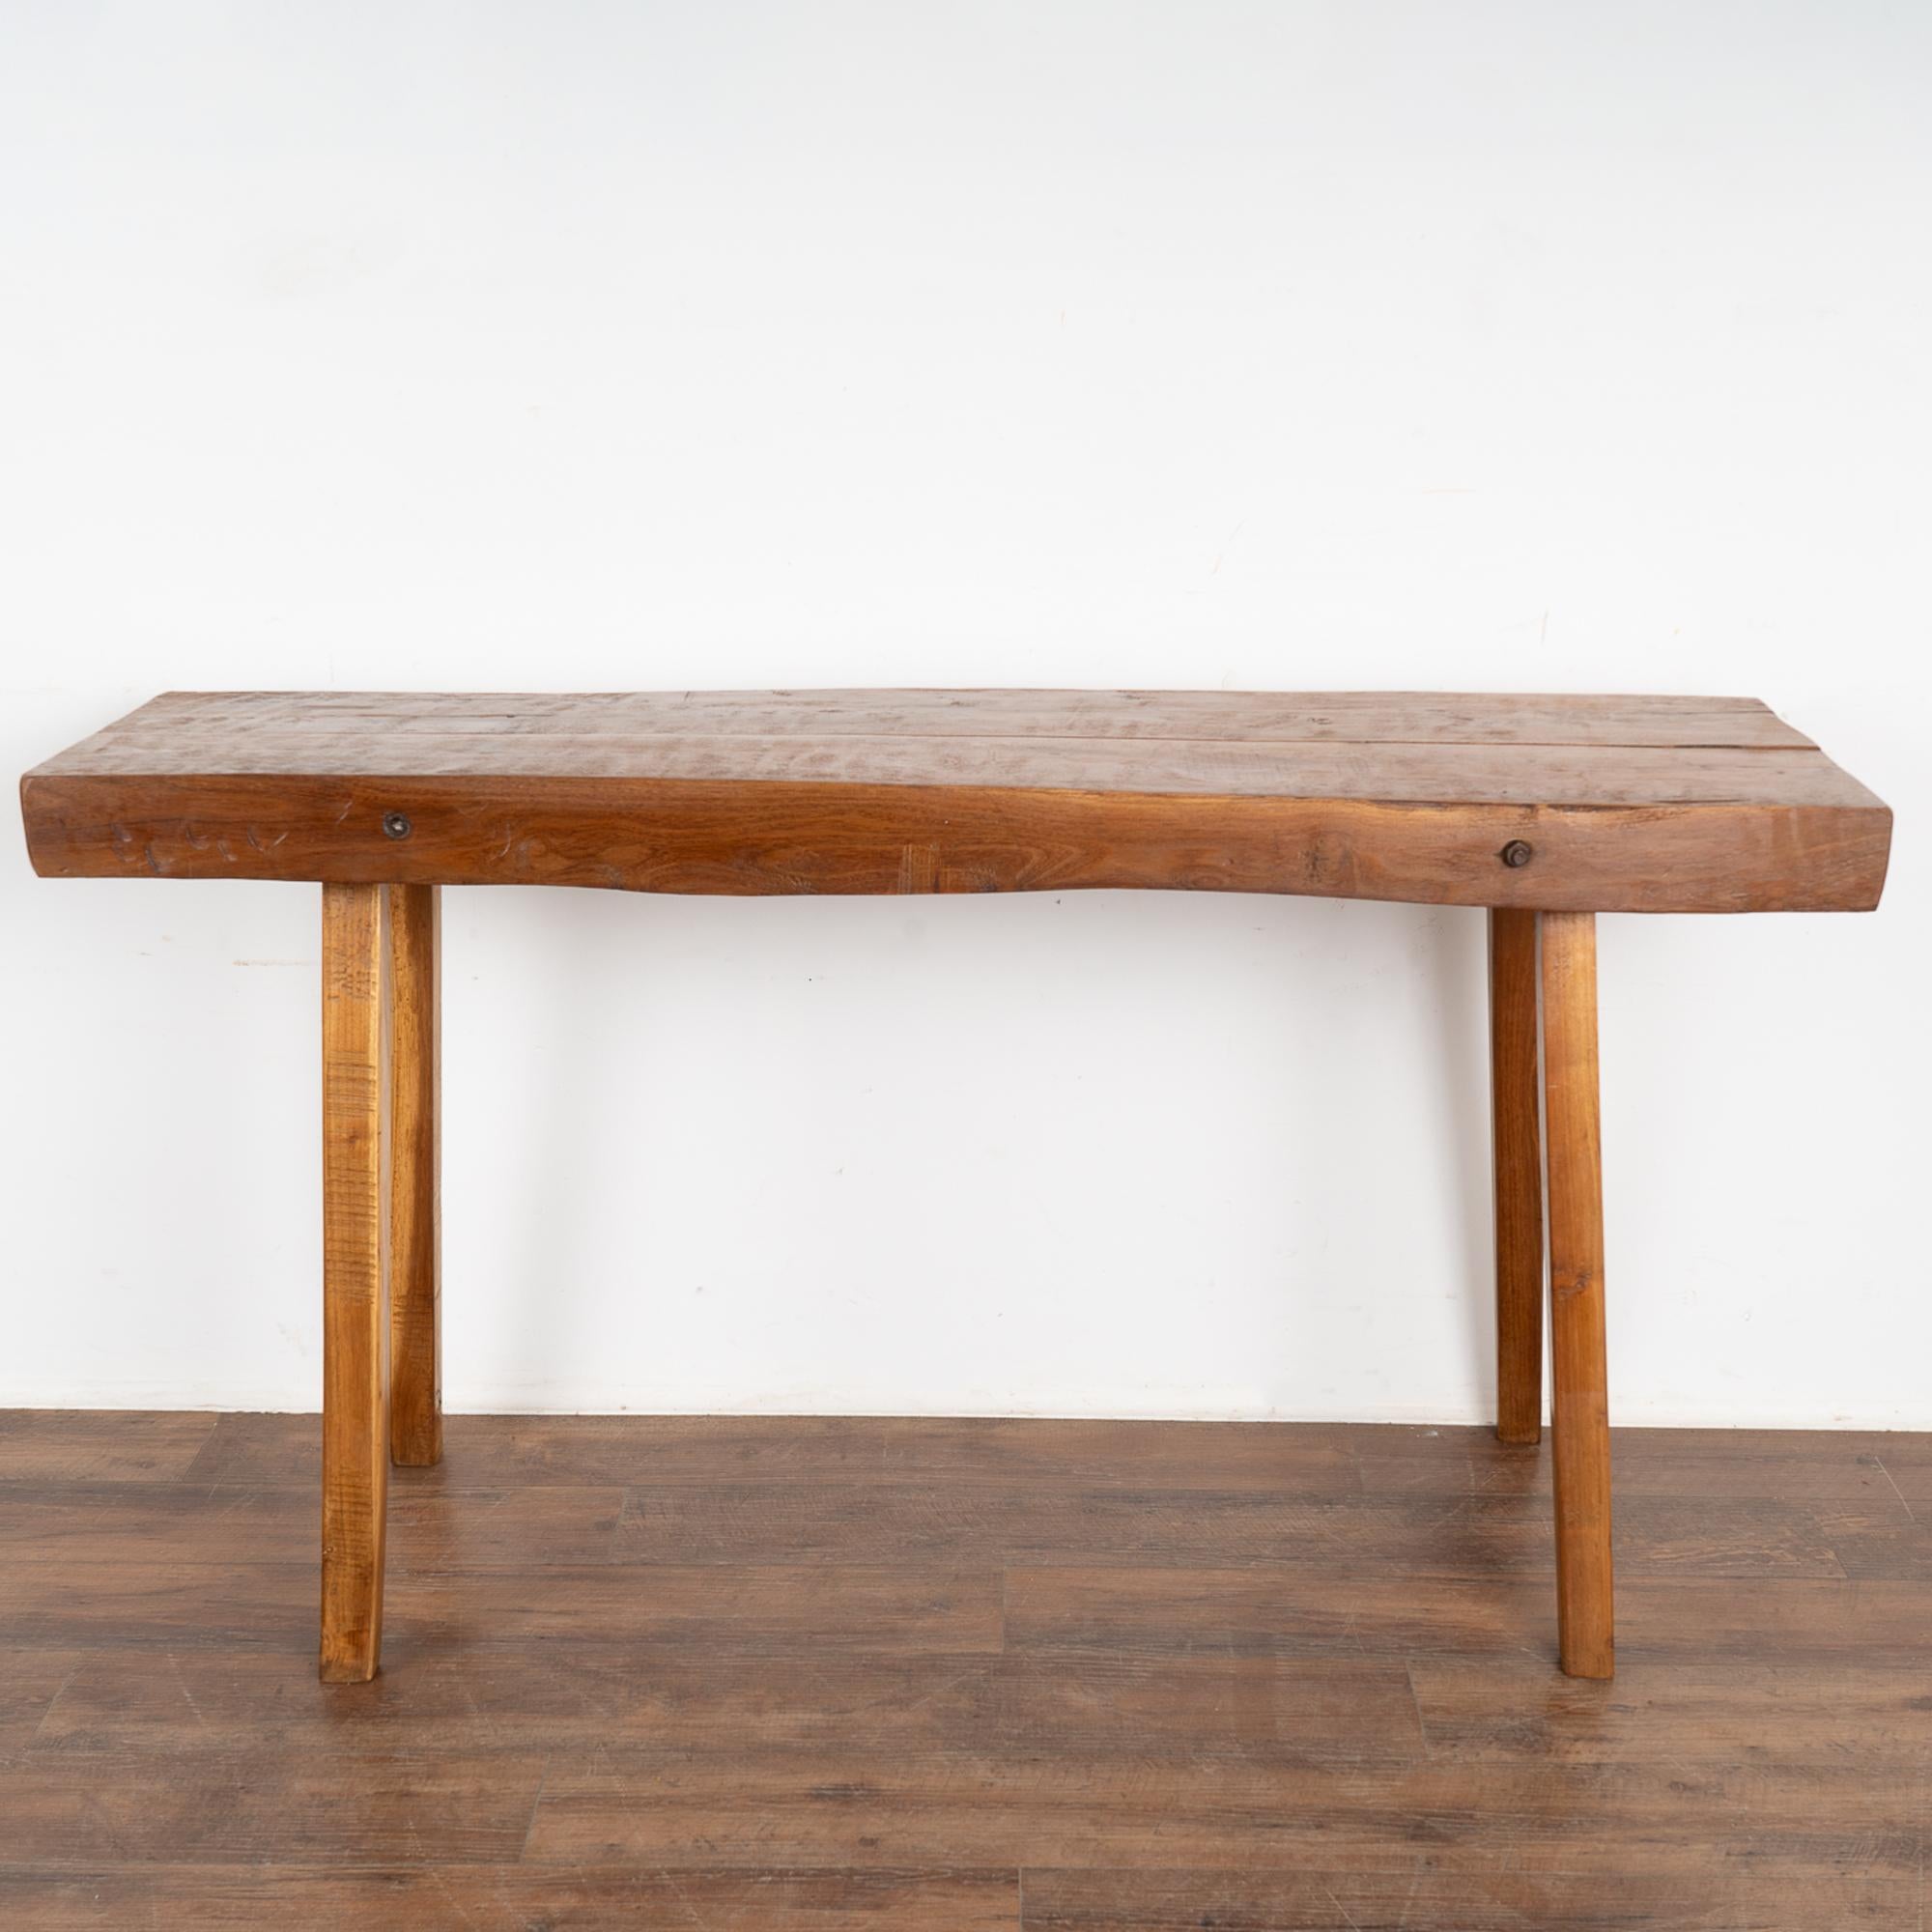 Hungarian Rustic Plank Console Table with Peg Legs, Hungary circa 1900's For Sale